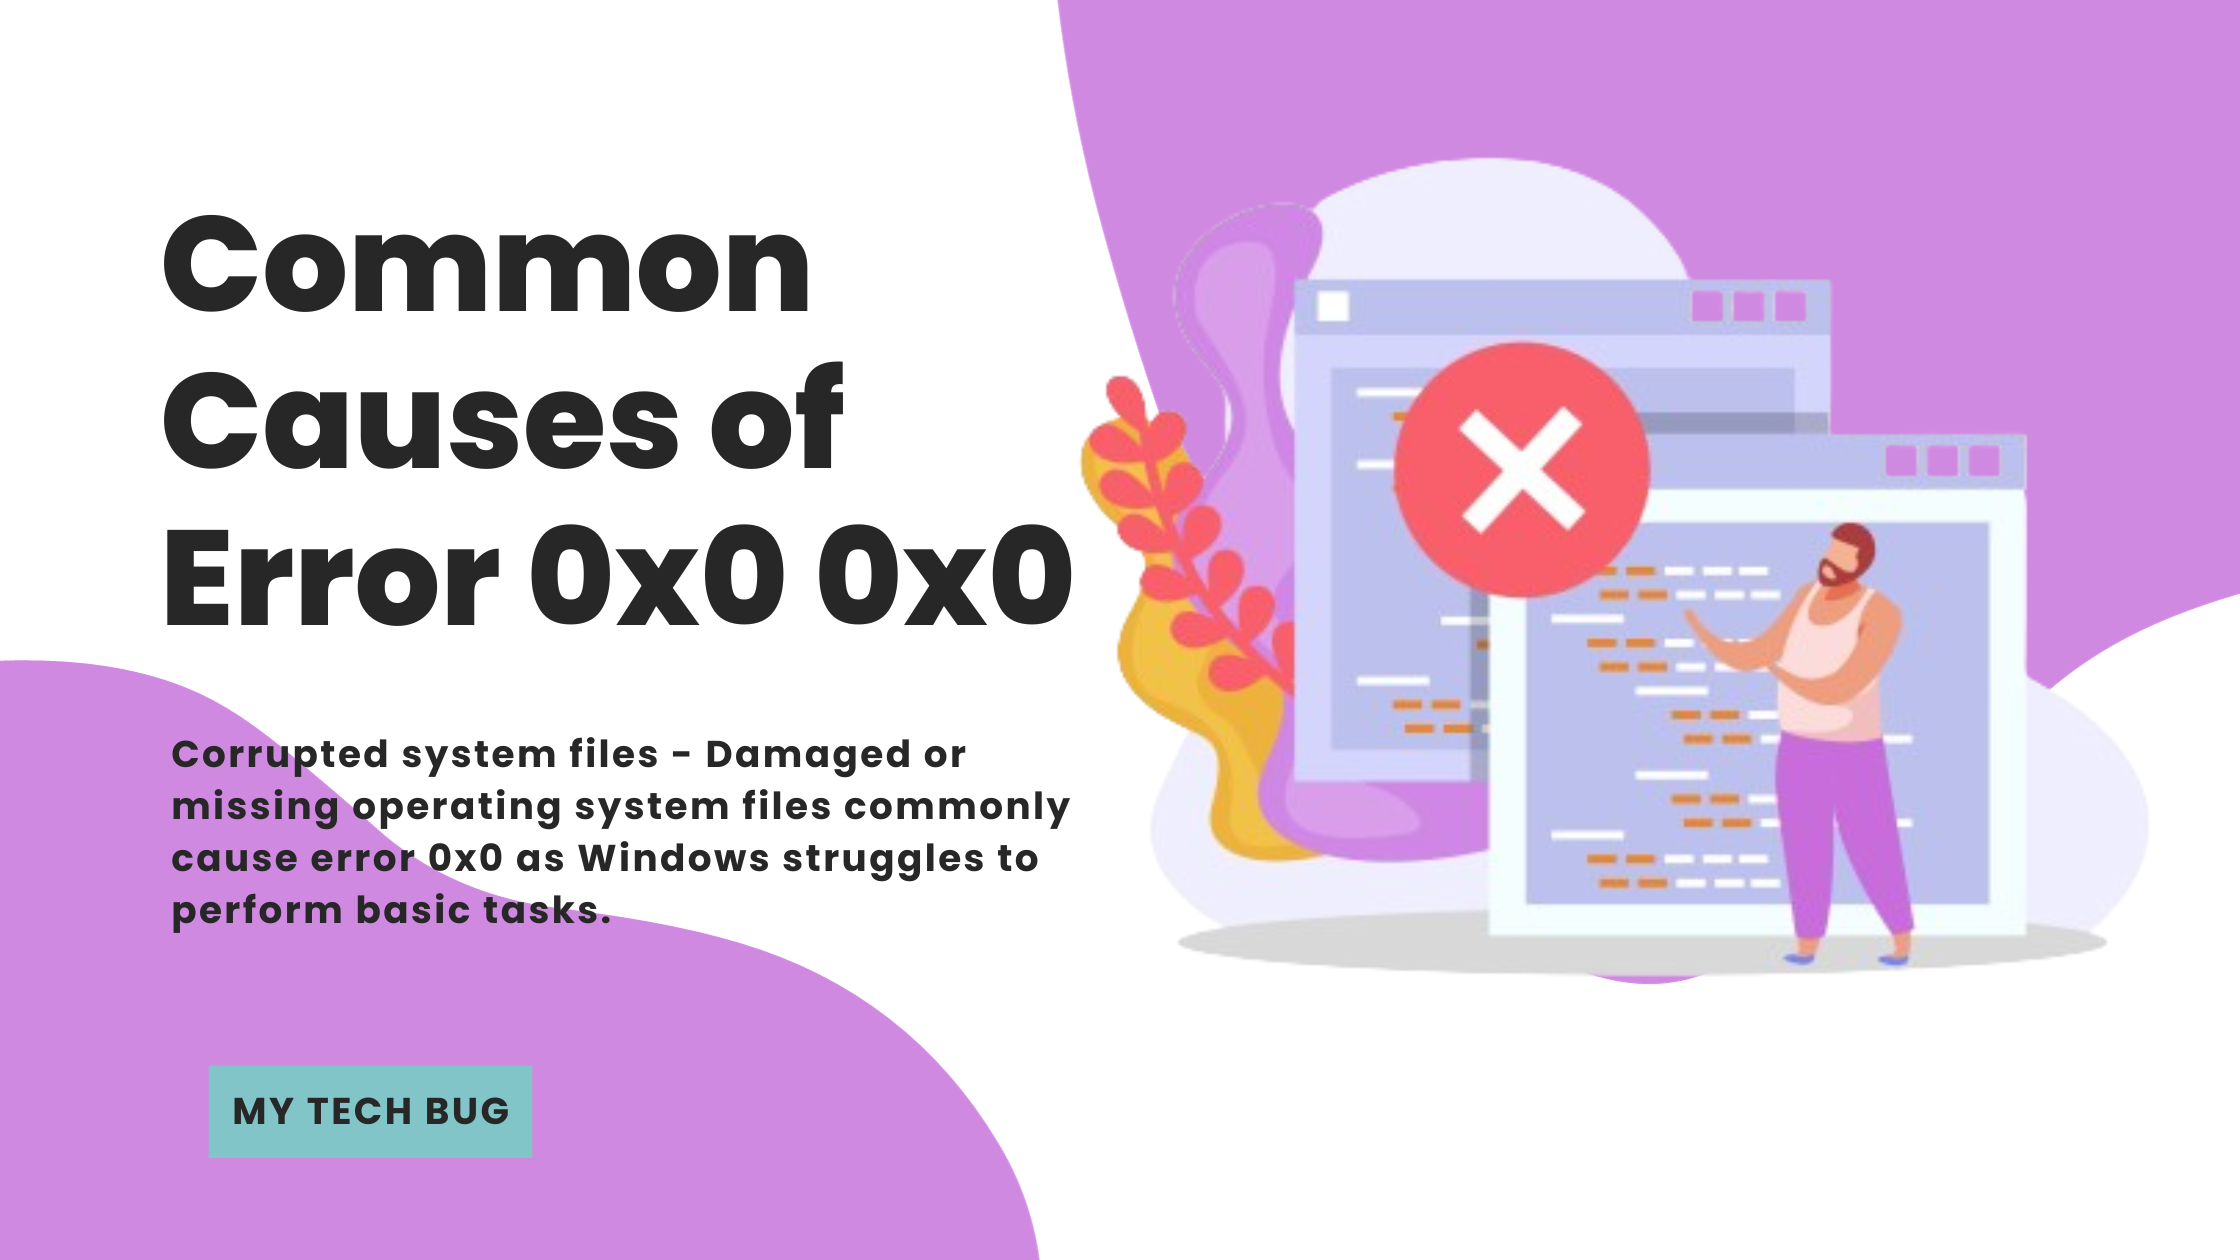 Corrupted system files - Damaged or missing operating system files commonly cause error 0x0 as Windows struggles to perform basic tasks.